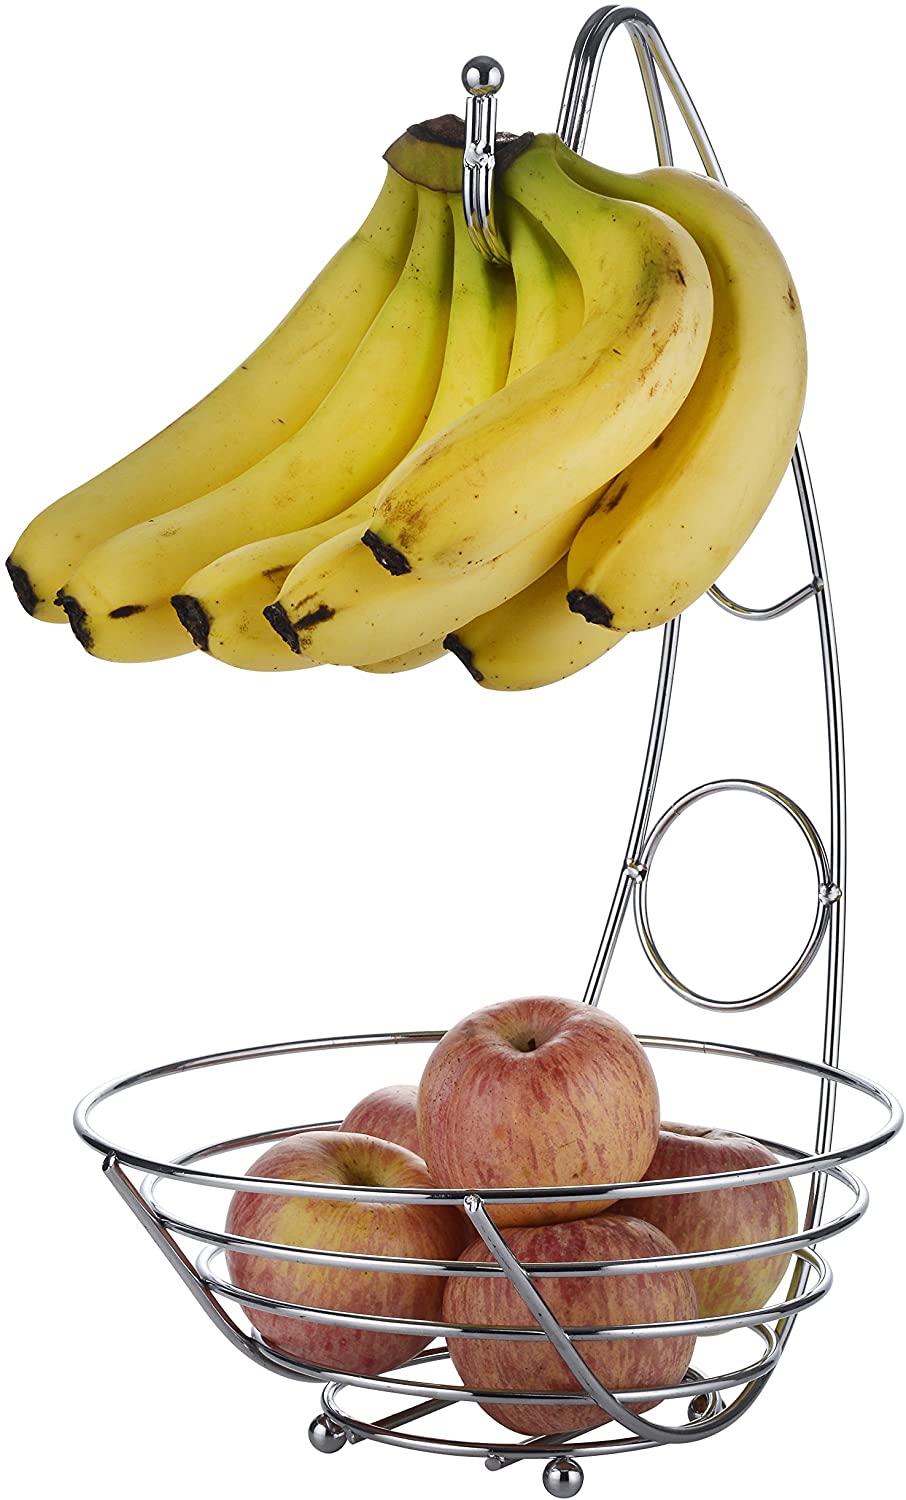 Wired Fruit Basket, Fruit Bowl Stand with Banana Hanger Hook